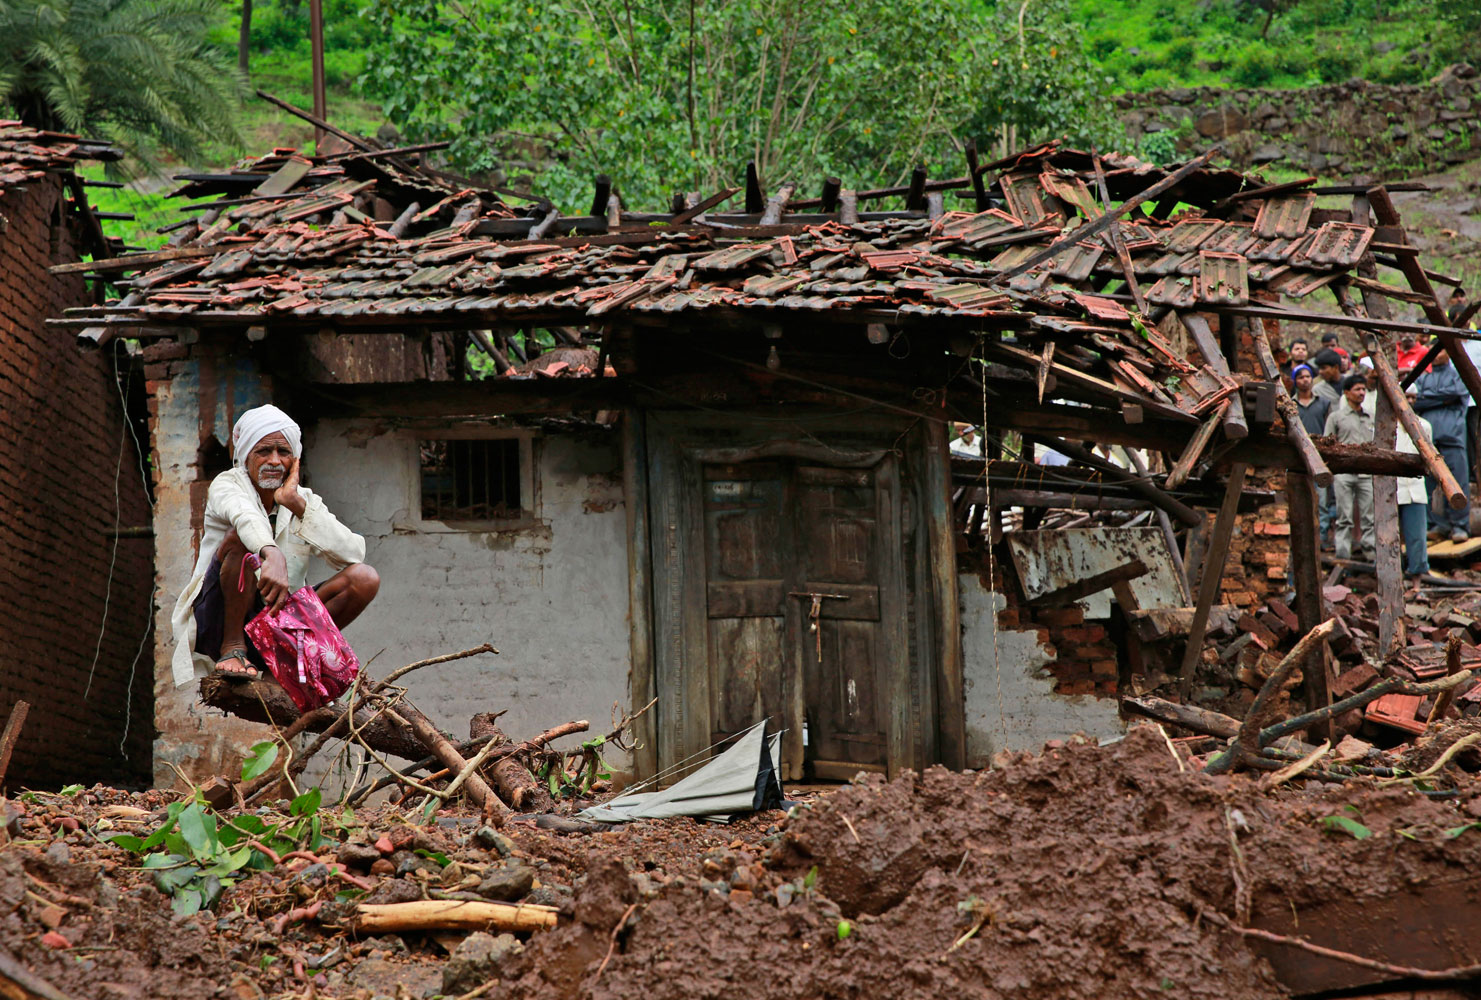 A villager watches a rescue operation sitting by his damaged house at the site of a landslide in Malin village, in the western Indian state of Maharashtra on Aug. 1, 2014.